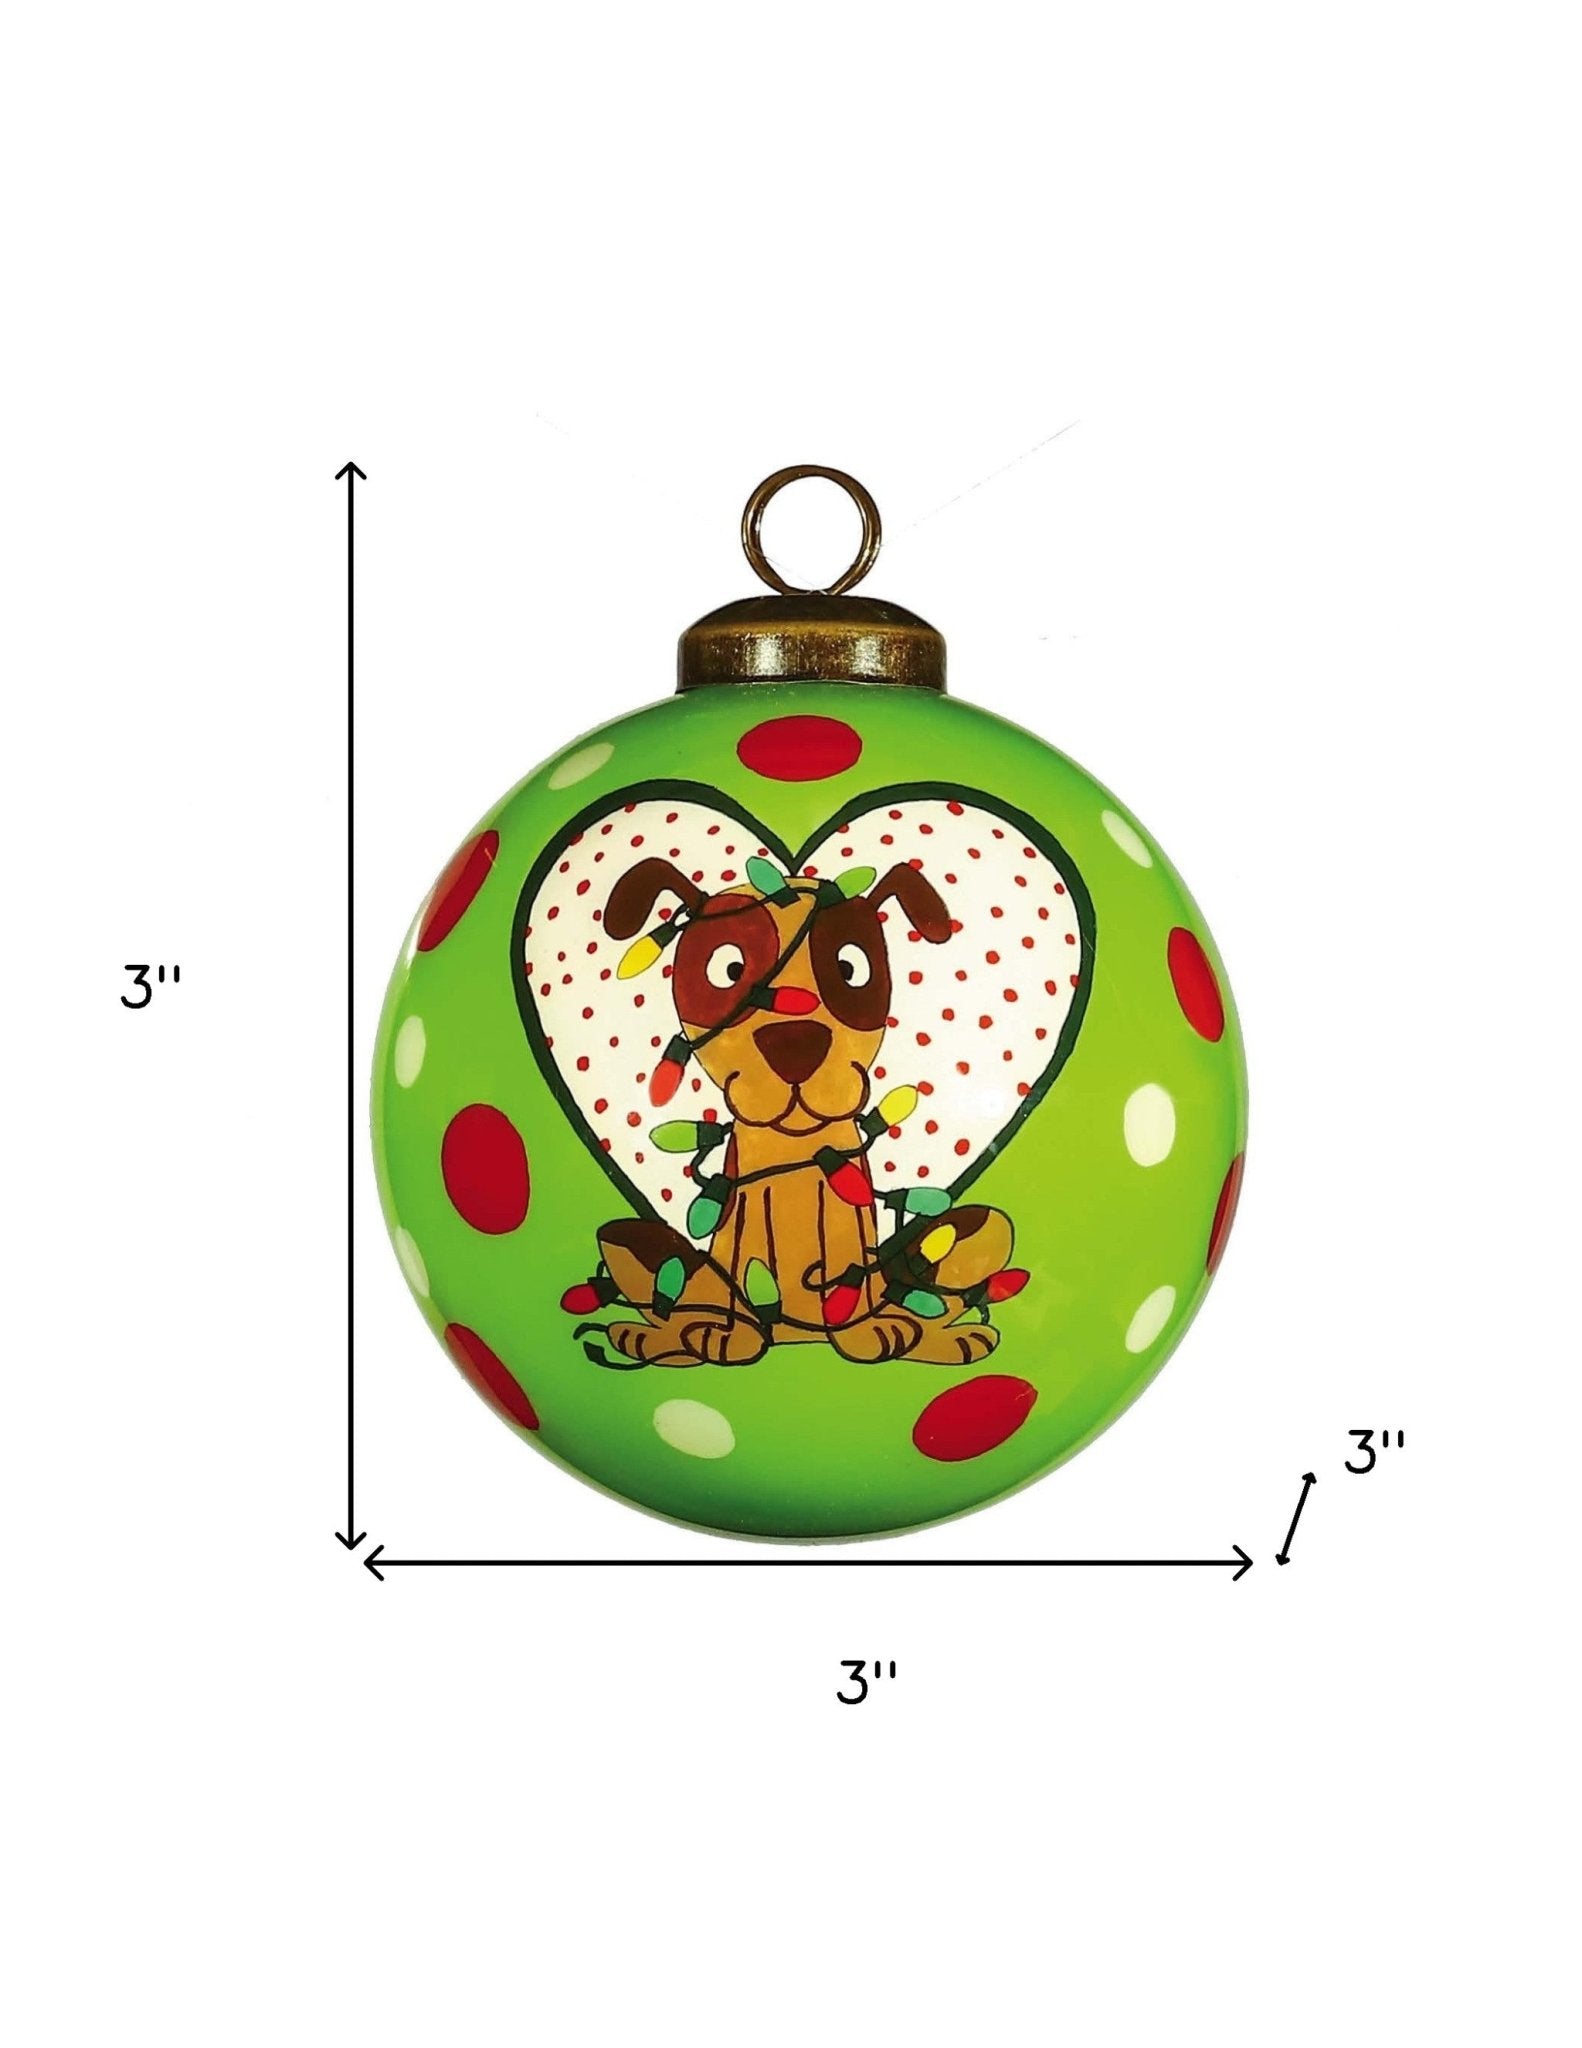 Charming Dog in a Heart Hand Painted Mouth Blown Glass Ornament - Tuesday Morning-Christmas Ornaments